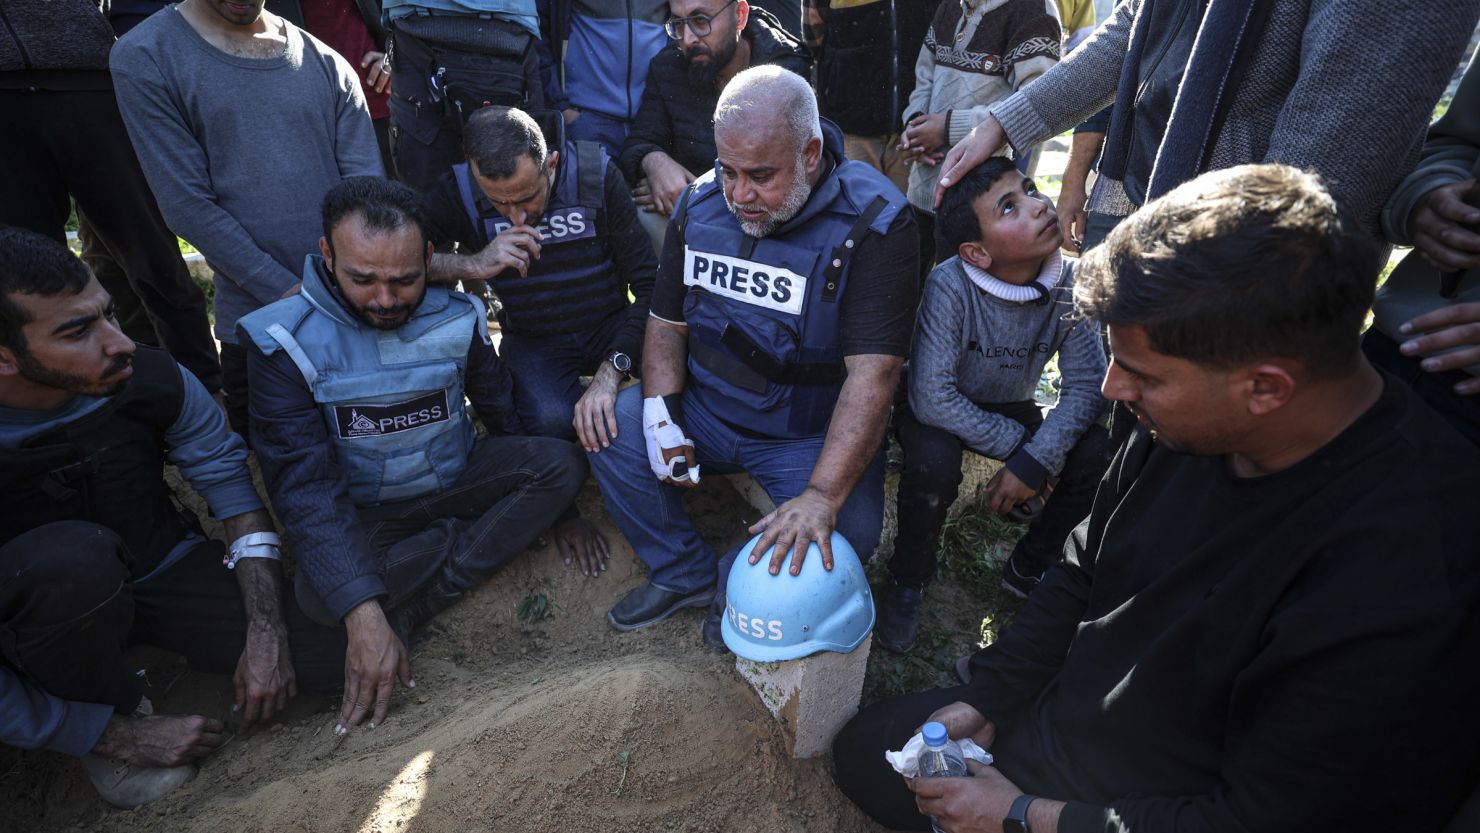 A Press helmet is placed over the grave of Hamza Dahdouh, a Palestinian journalist who worked for Al Jazeera and was killed in an Israeli air strike on Rafah.